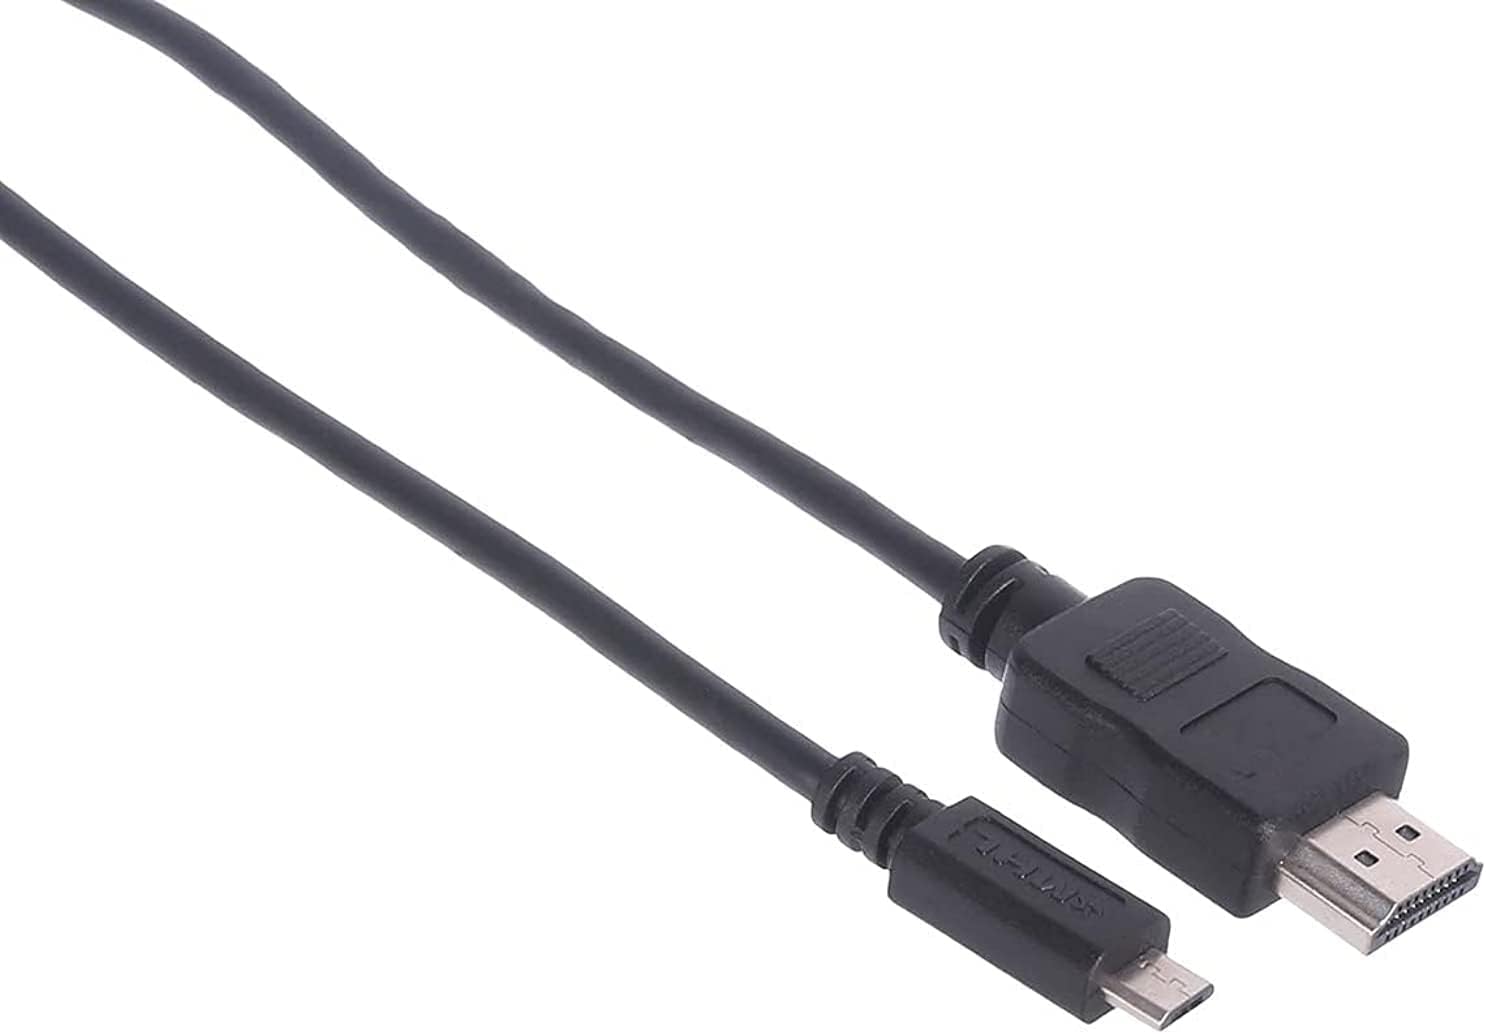 Keendex Kx2233 MHL HDMI Male to Micro Male Cable, 2 m - Black-result.feed.gl_electronics-size